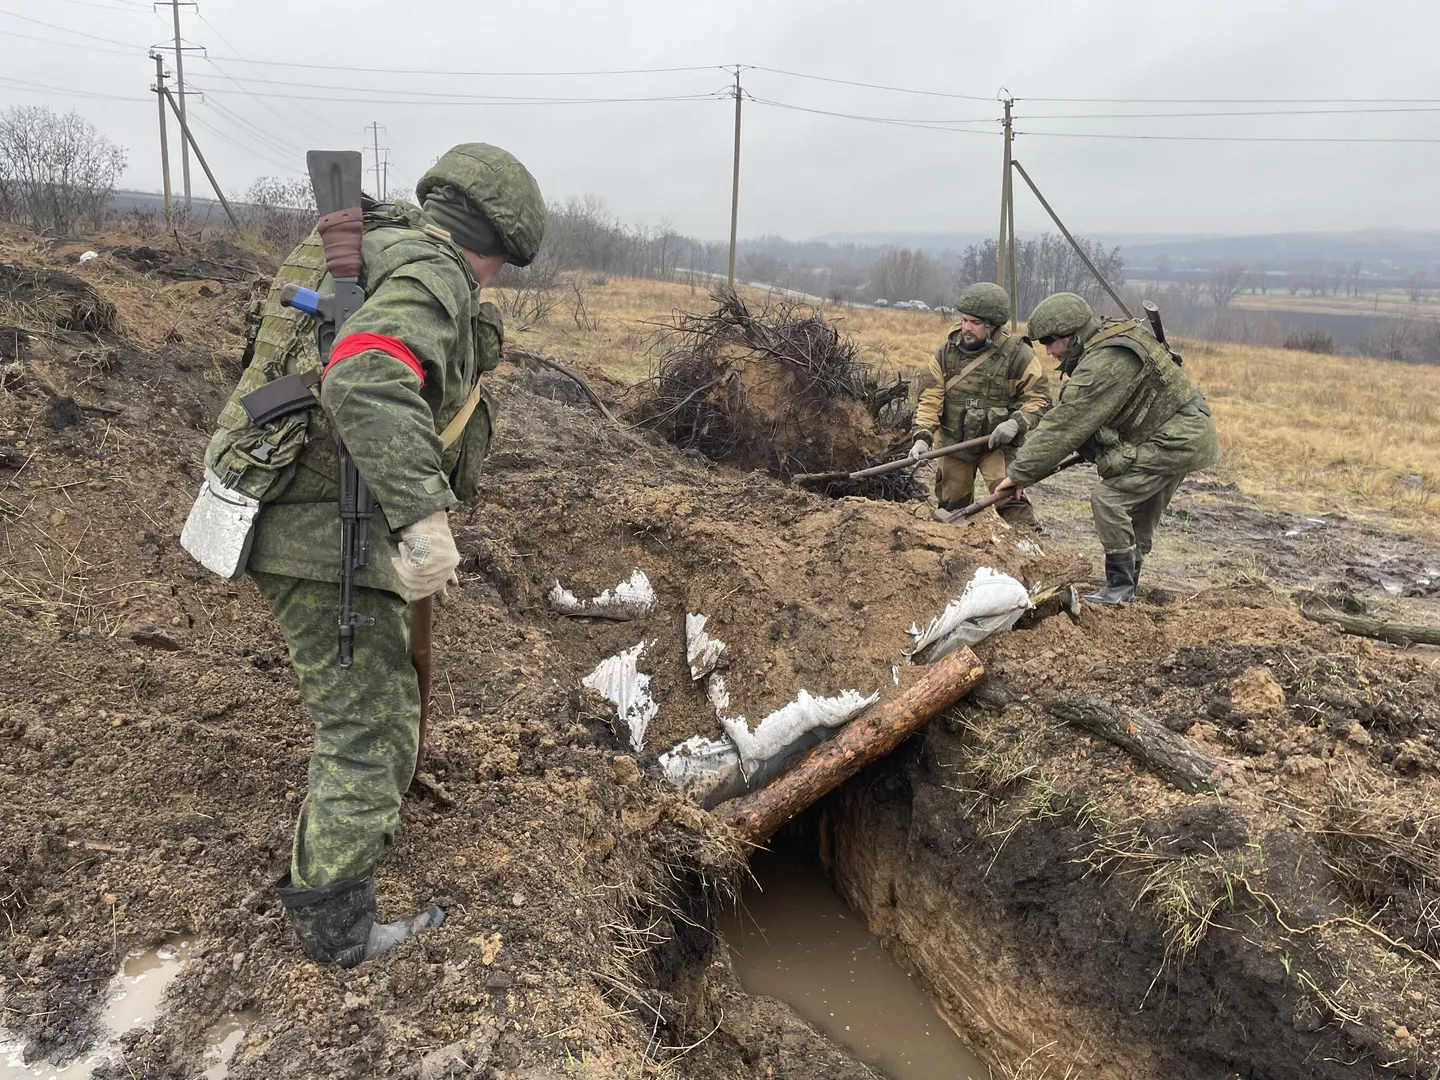 Irregardless of weather, soldiers continue their work